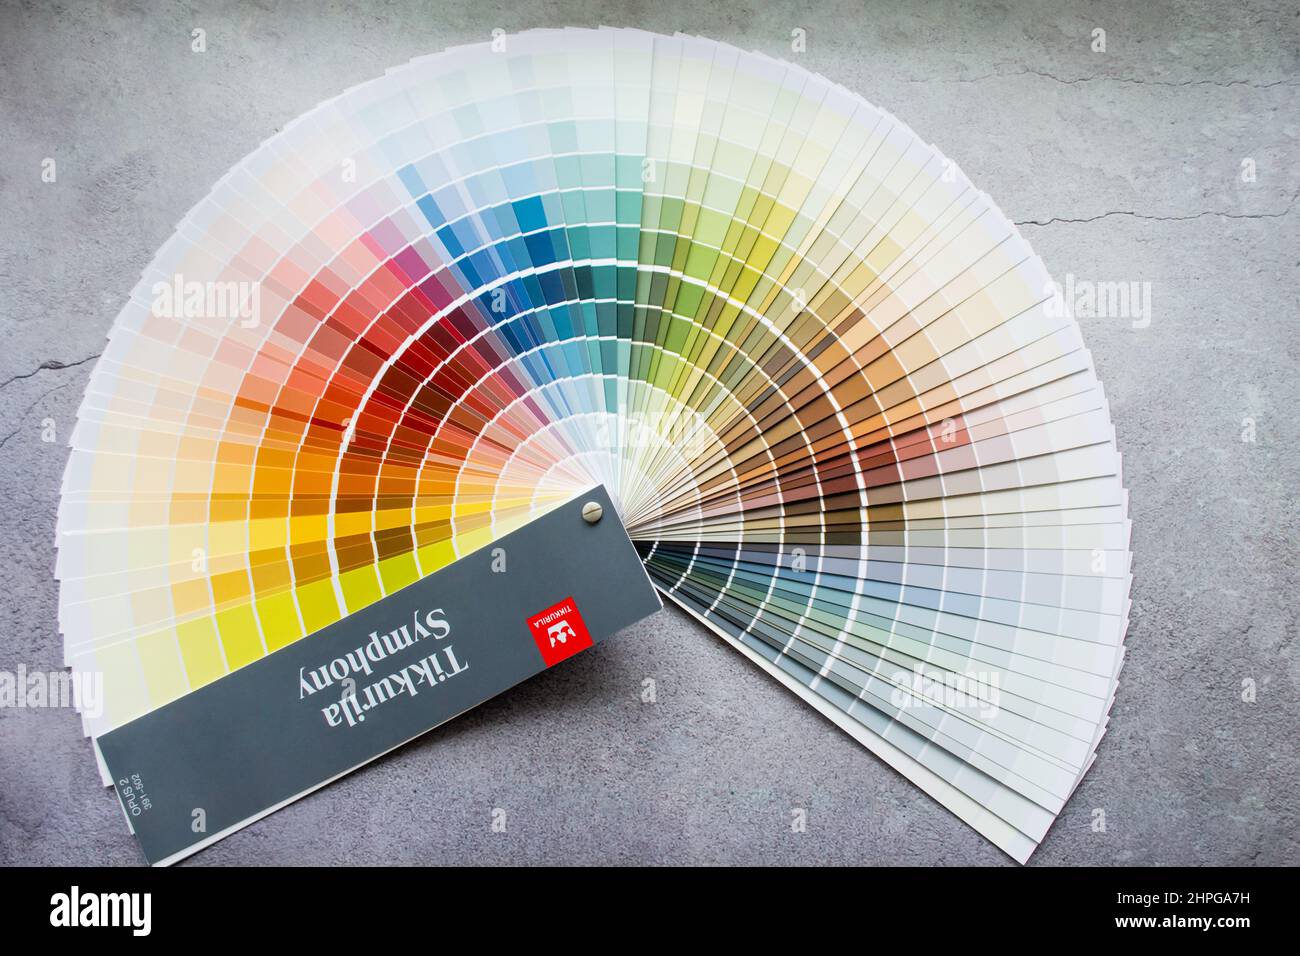 Moscow, Russia, June 2021: Paper Palette Fan Tikkurila paint samples - interior design wall painting. Gray concrete background. Stock Photo